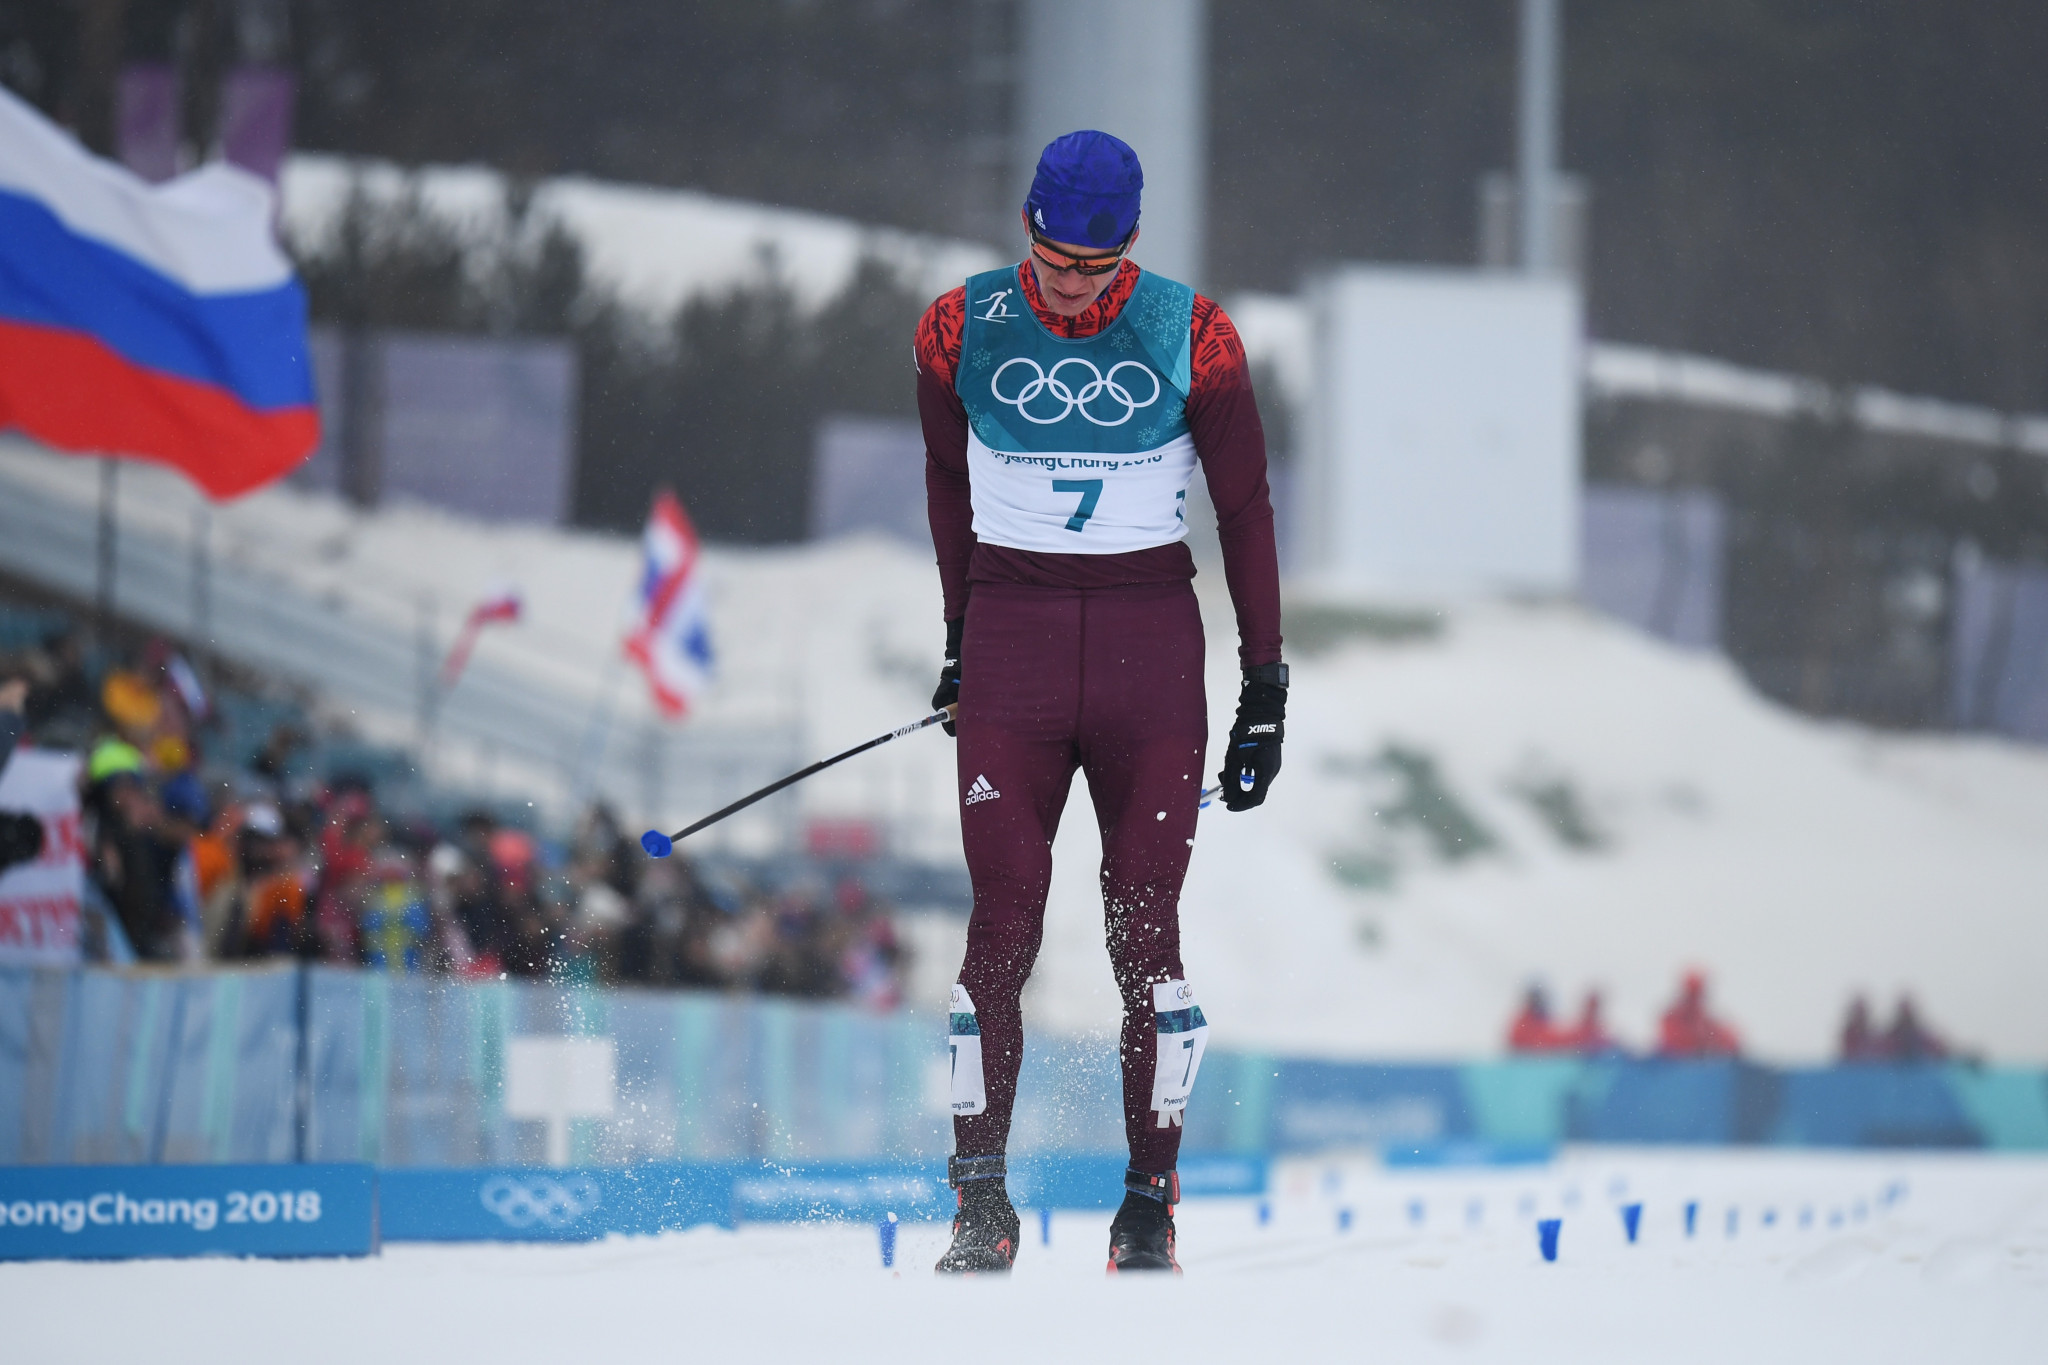 OAR's Alexander Bolshunov was bitterly disappointed with his second-place finish ©Getty Images